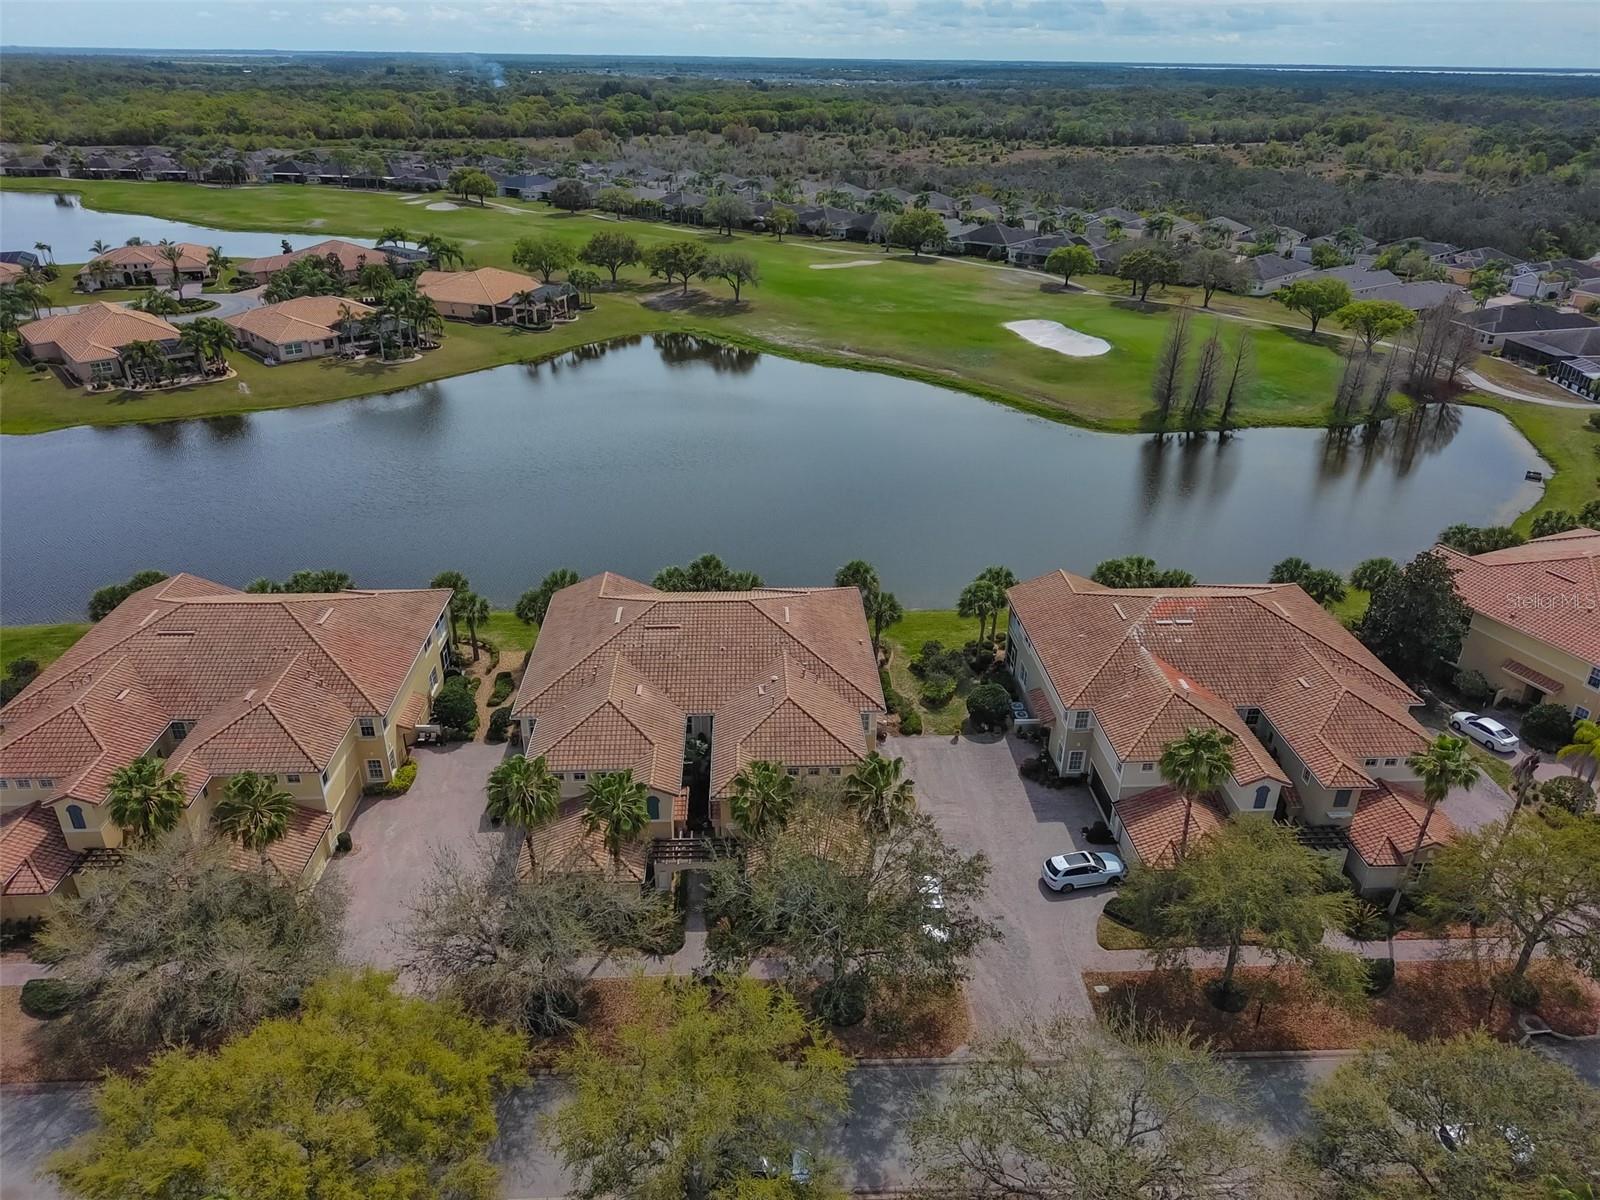 Ariel view of condo on the water with the golf course.